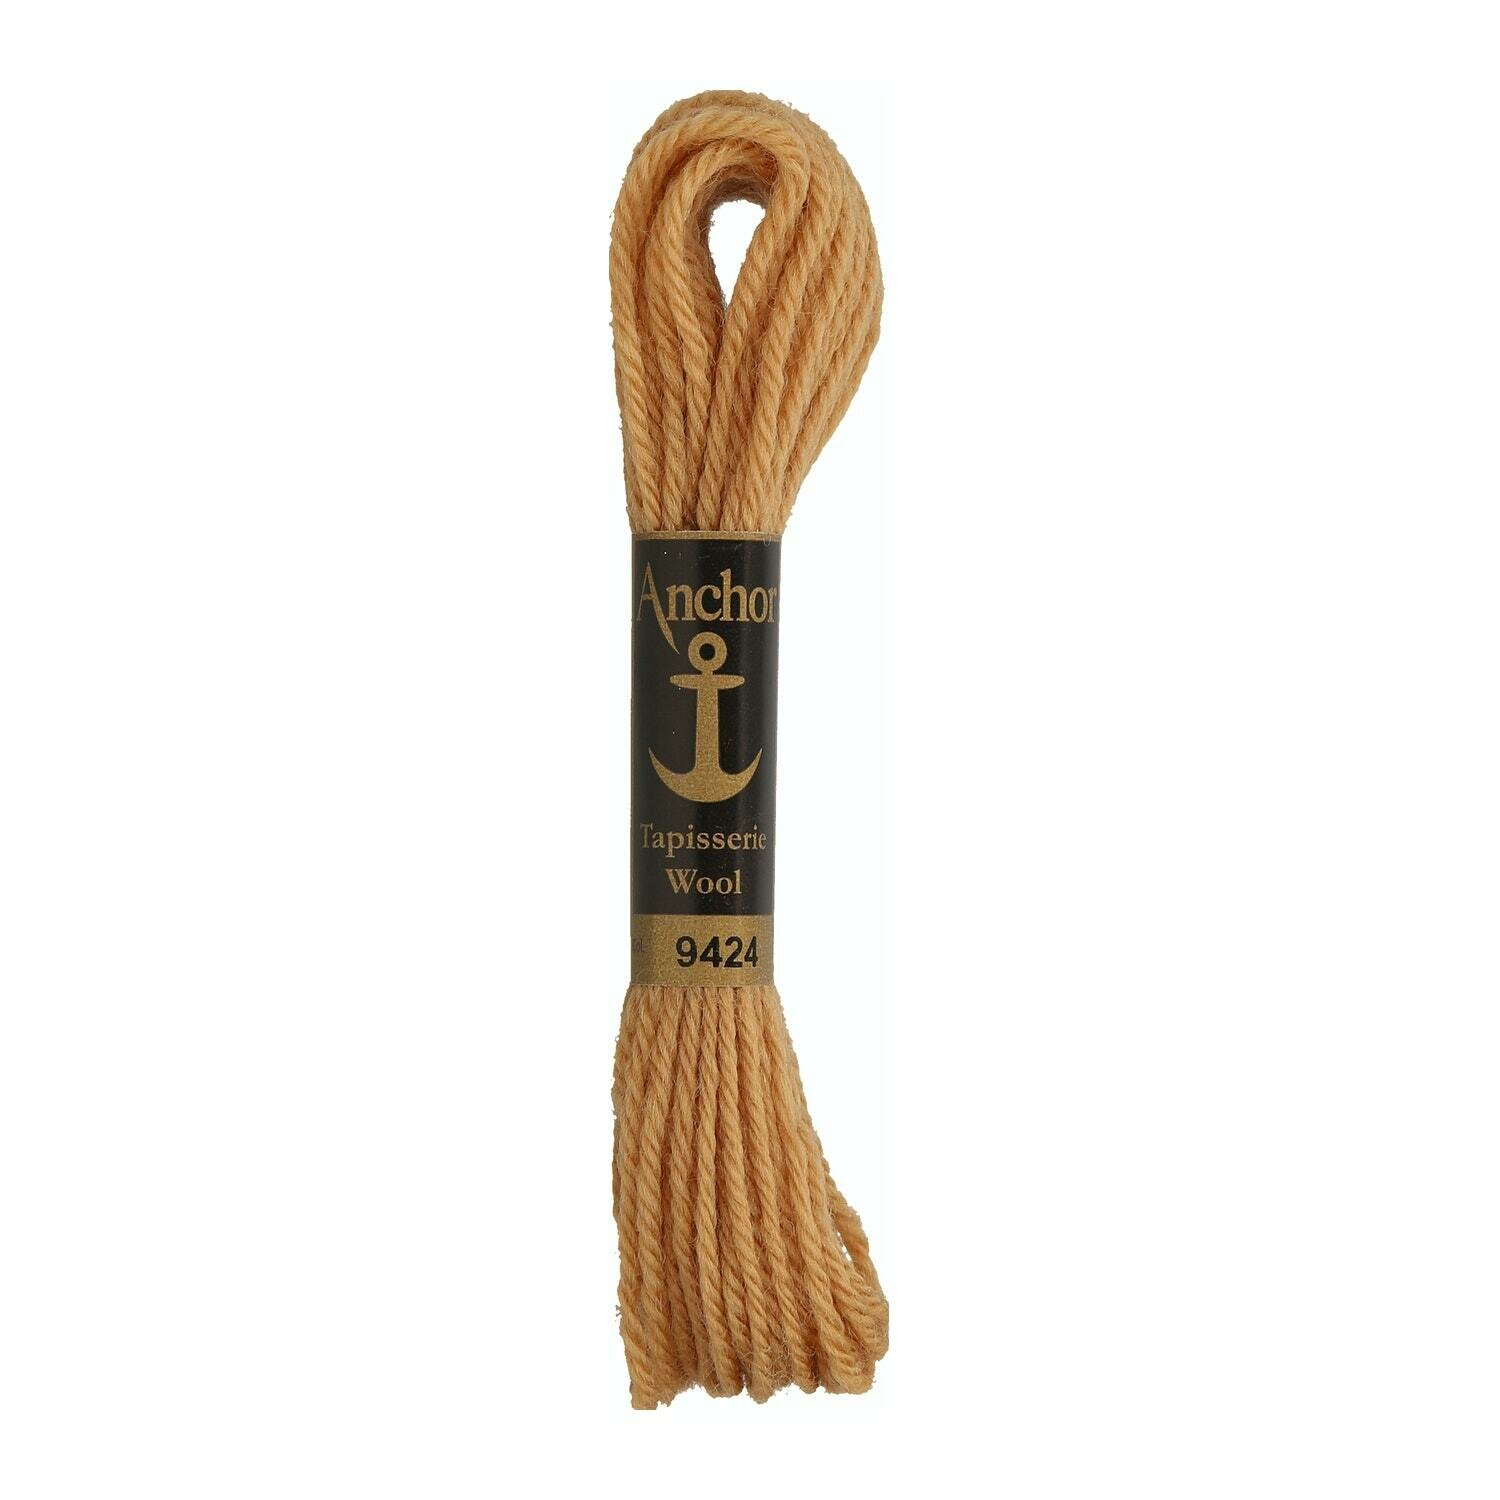 Anchor Tapisserie Wool # 09424